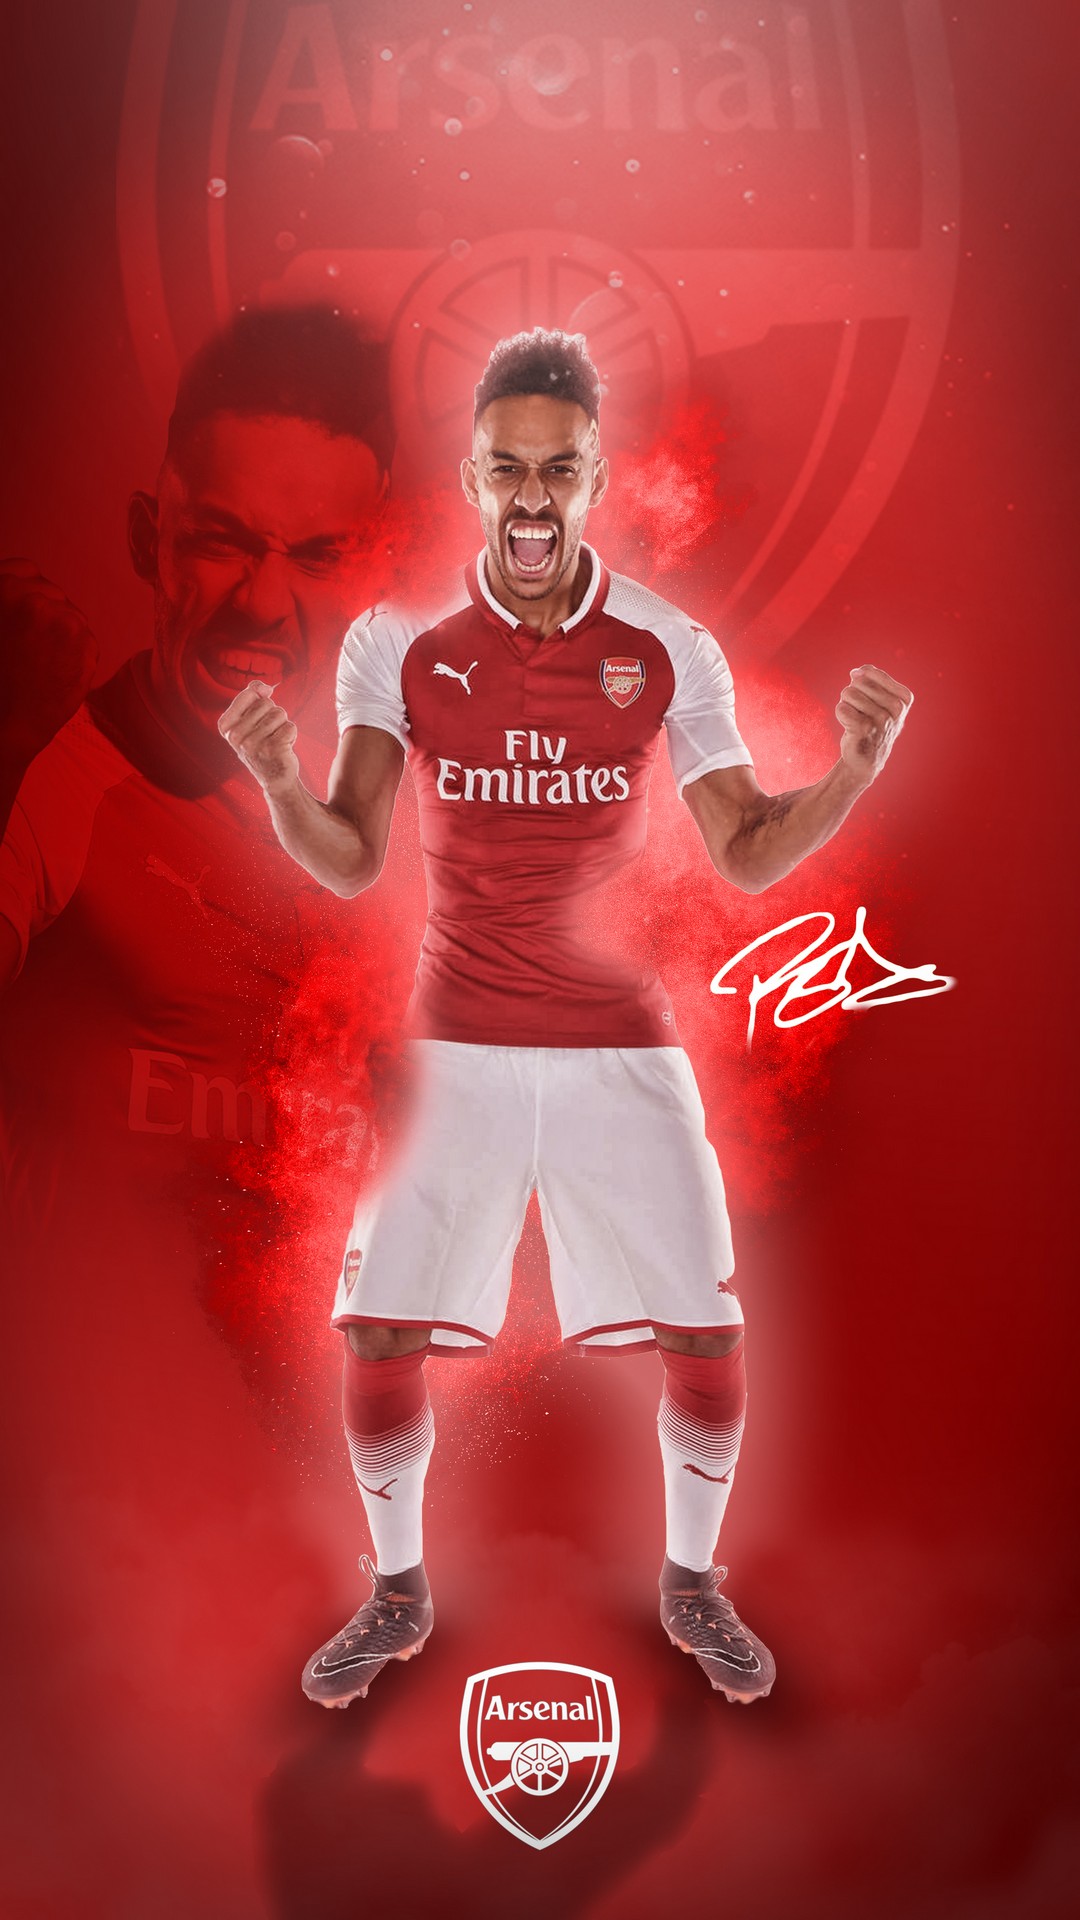 Aubameyang Arsenal Players Android Wallpaper with HD resolution 1080x1920